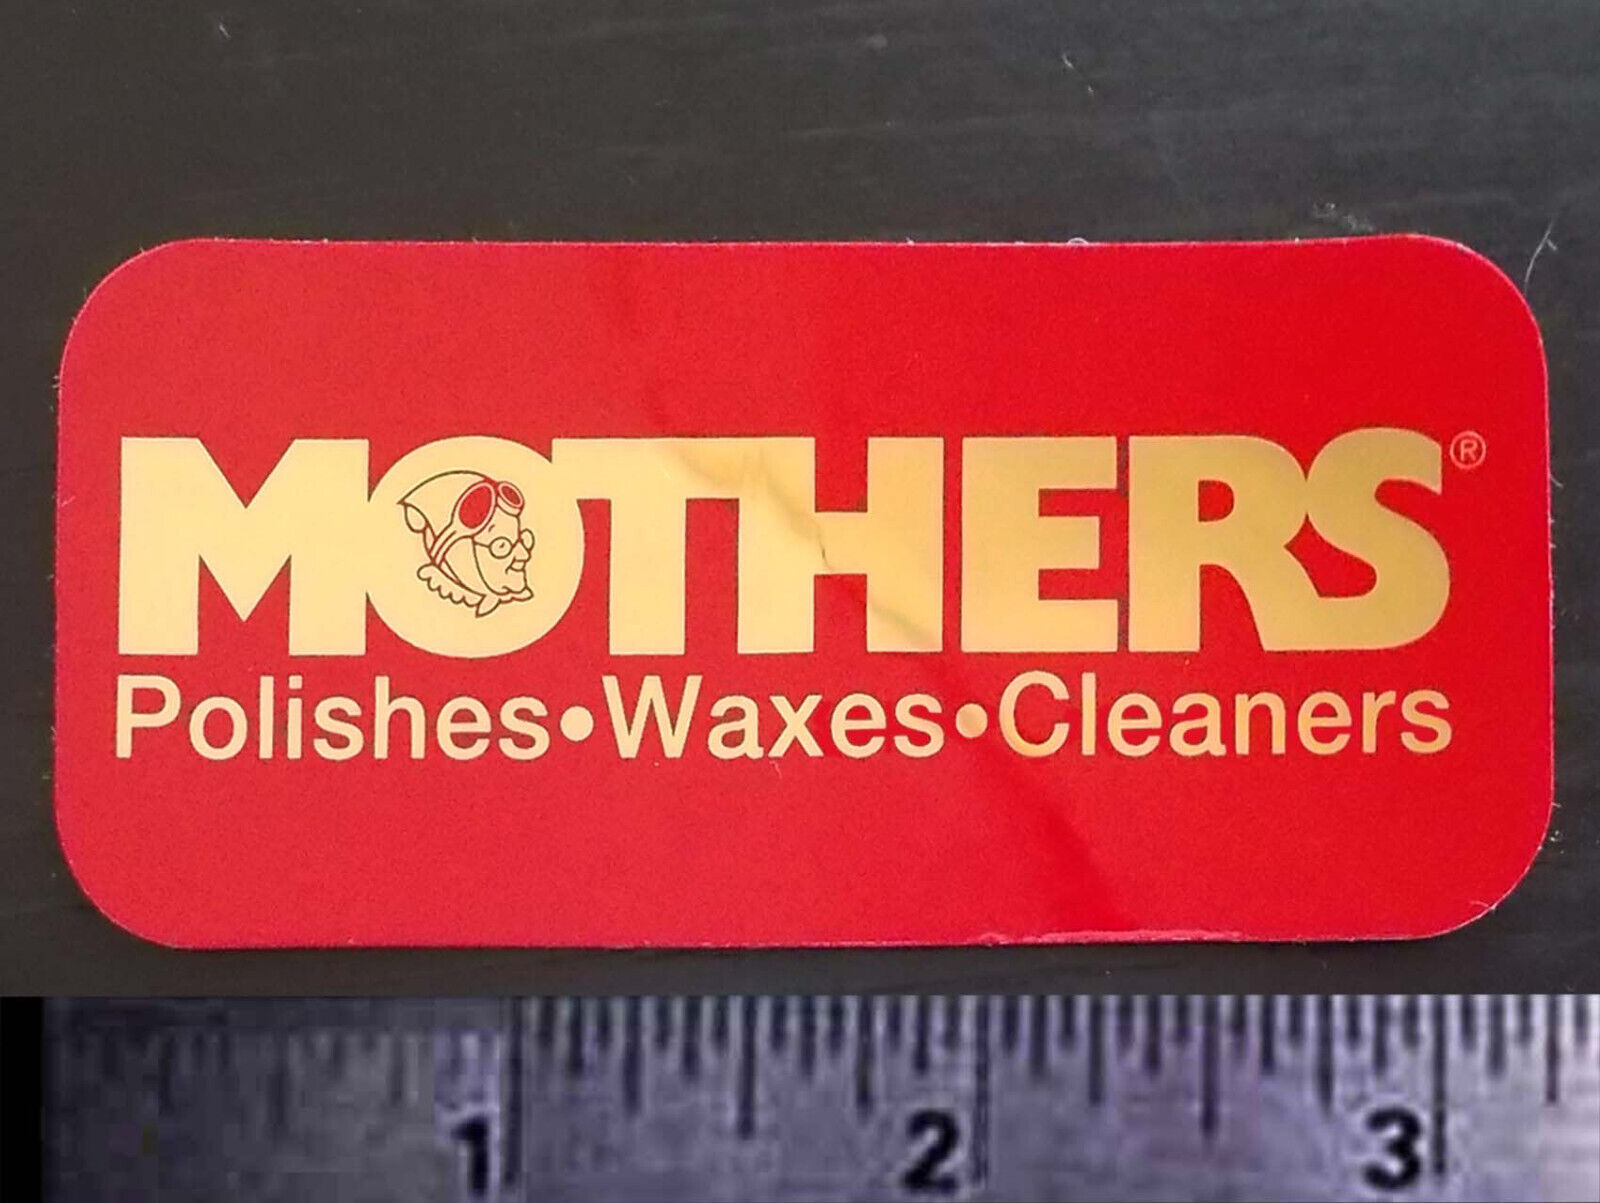 MOTHERS - Polishes - Waxes - Cleaners - Original Vintage Racing Decal/Sticker